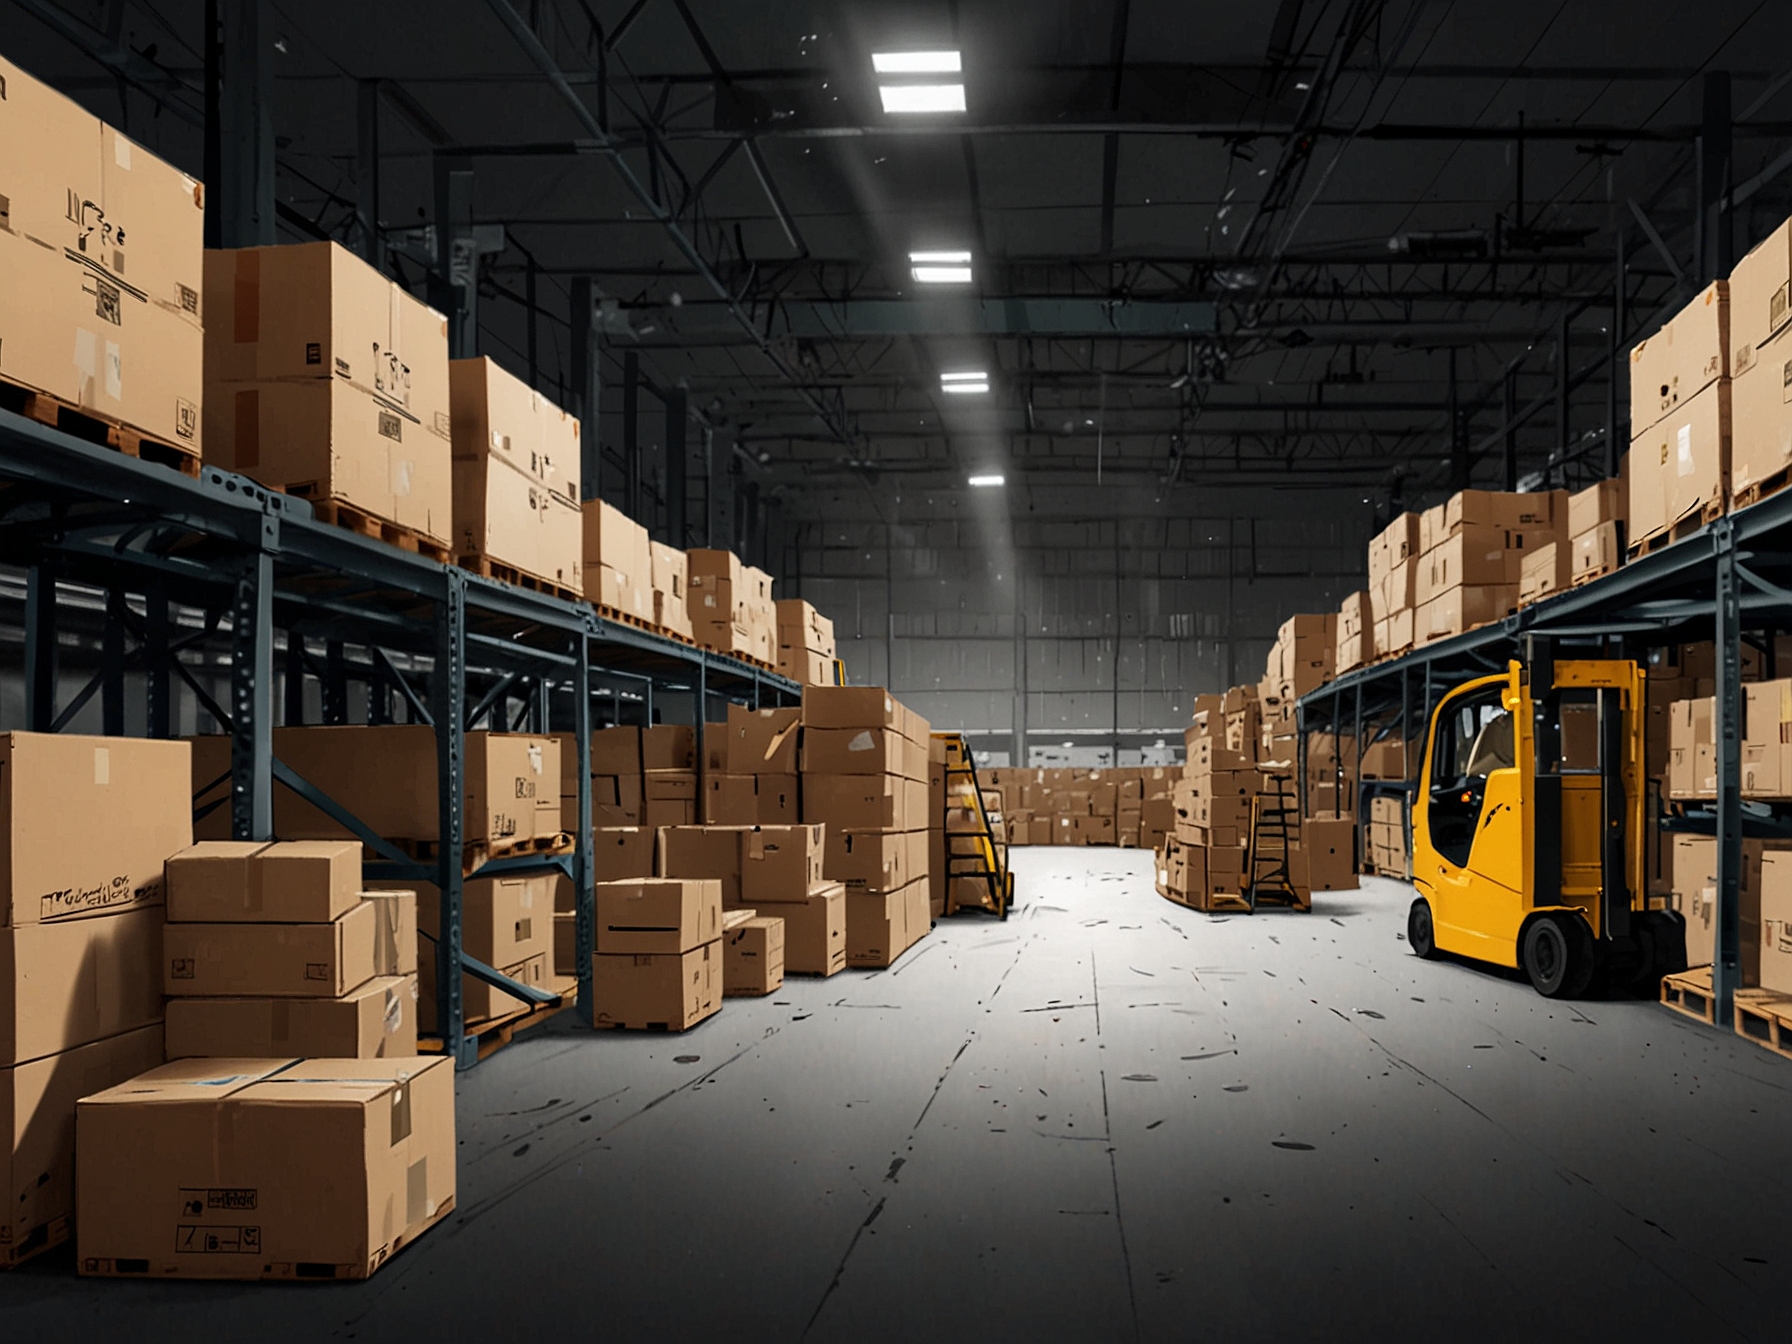 A busy warehouse with boxes labeled On Holding delayed due to supply chain disruptions, symbolizing the ongoing logistical challenges affecting product availability and customer satisfaction.